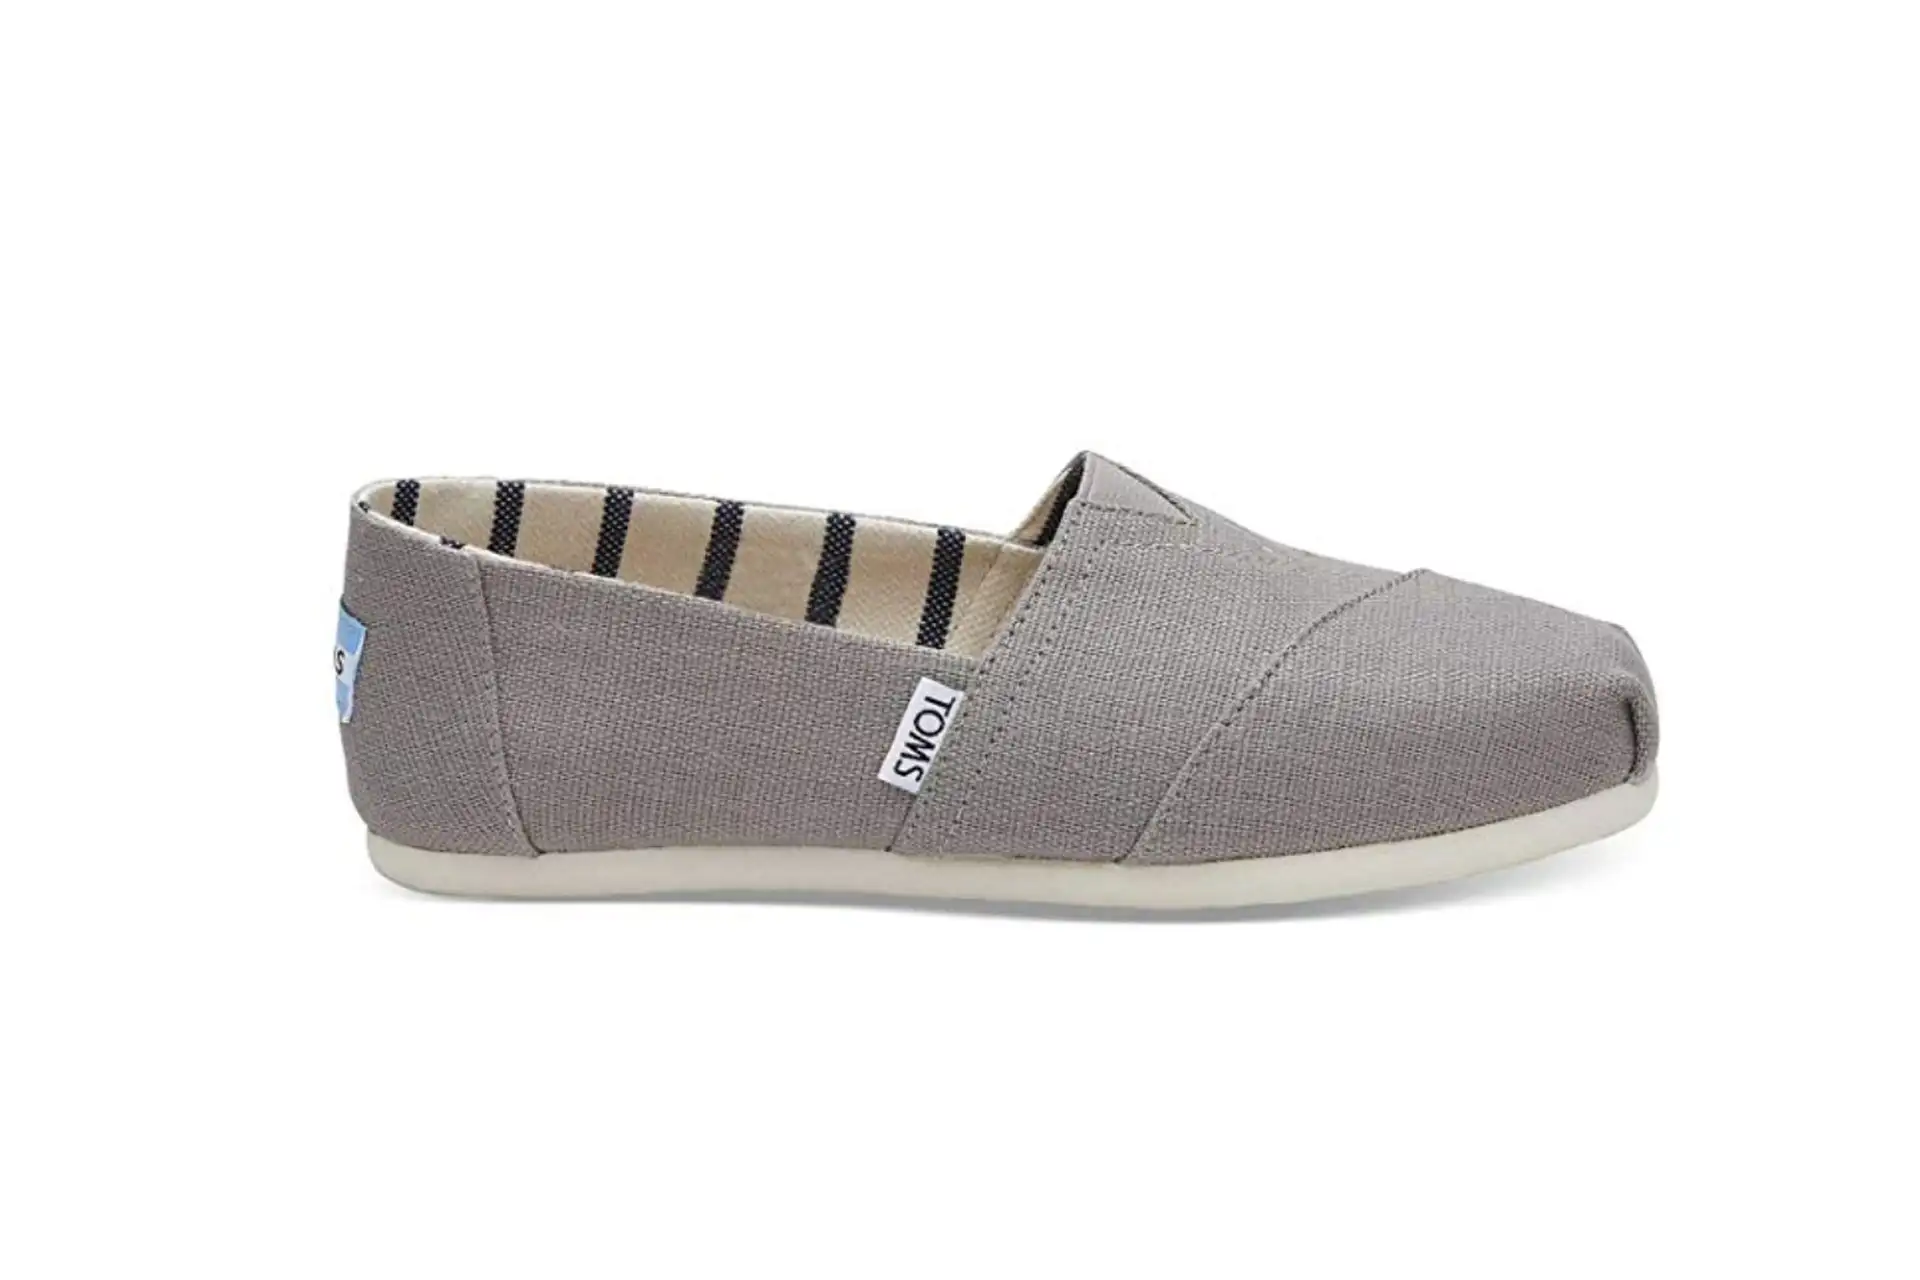 TOMS Slip-On Shoes in Gray; Courtesy of Amazon